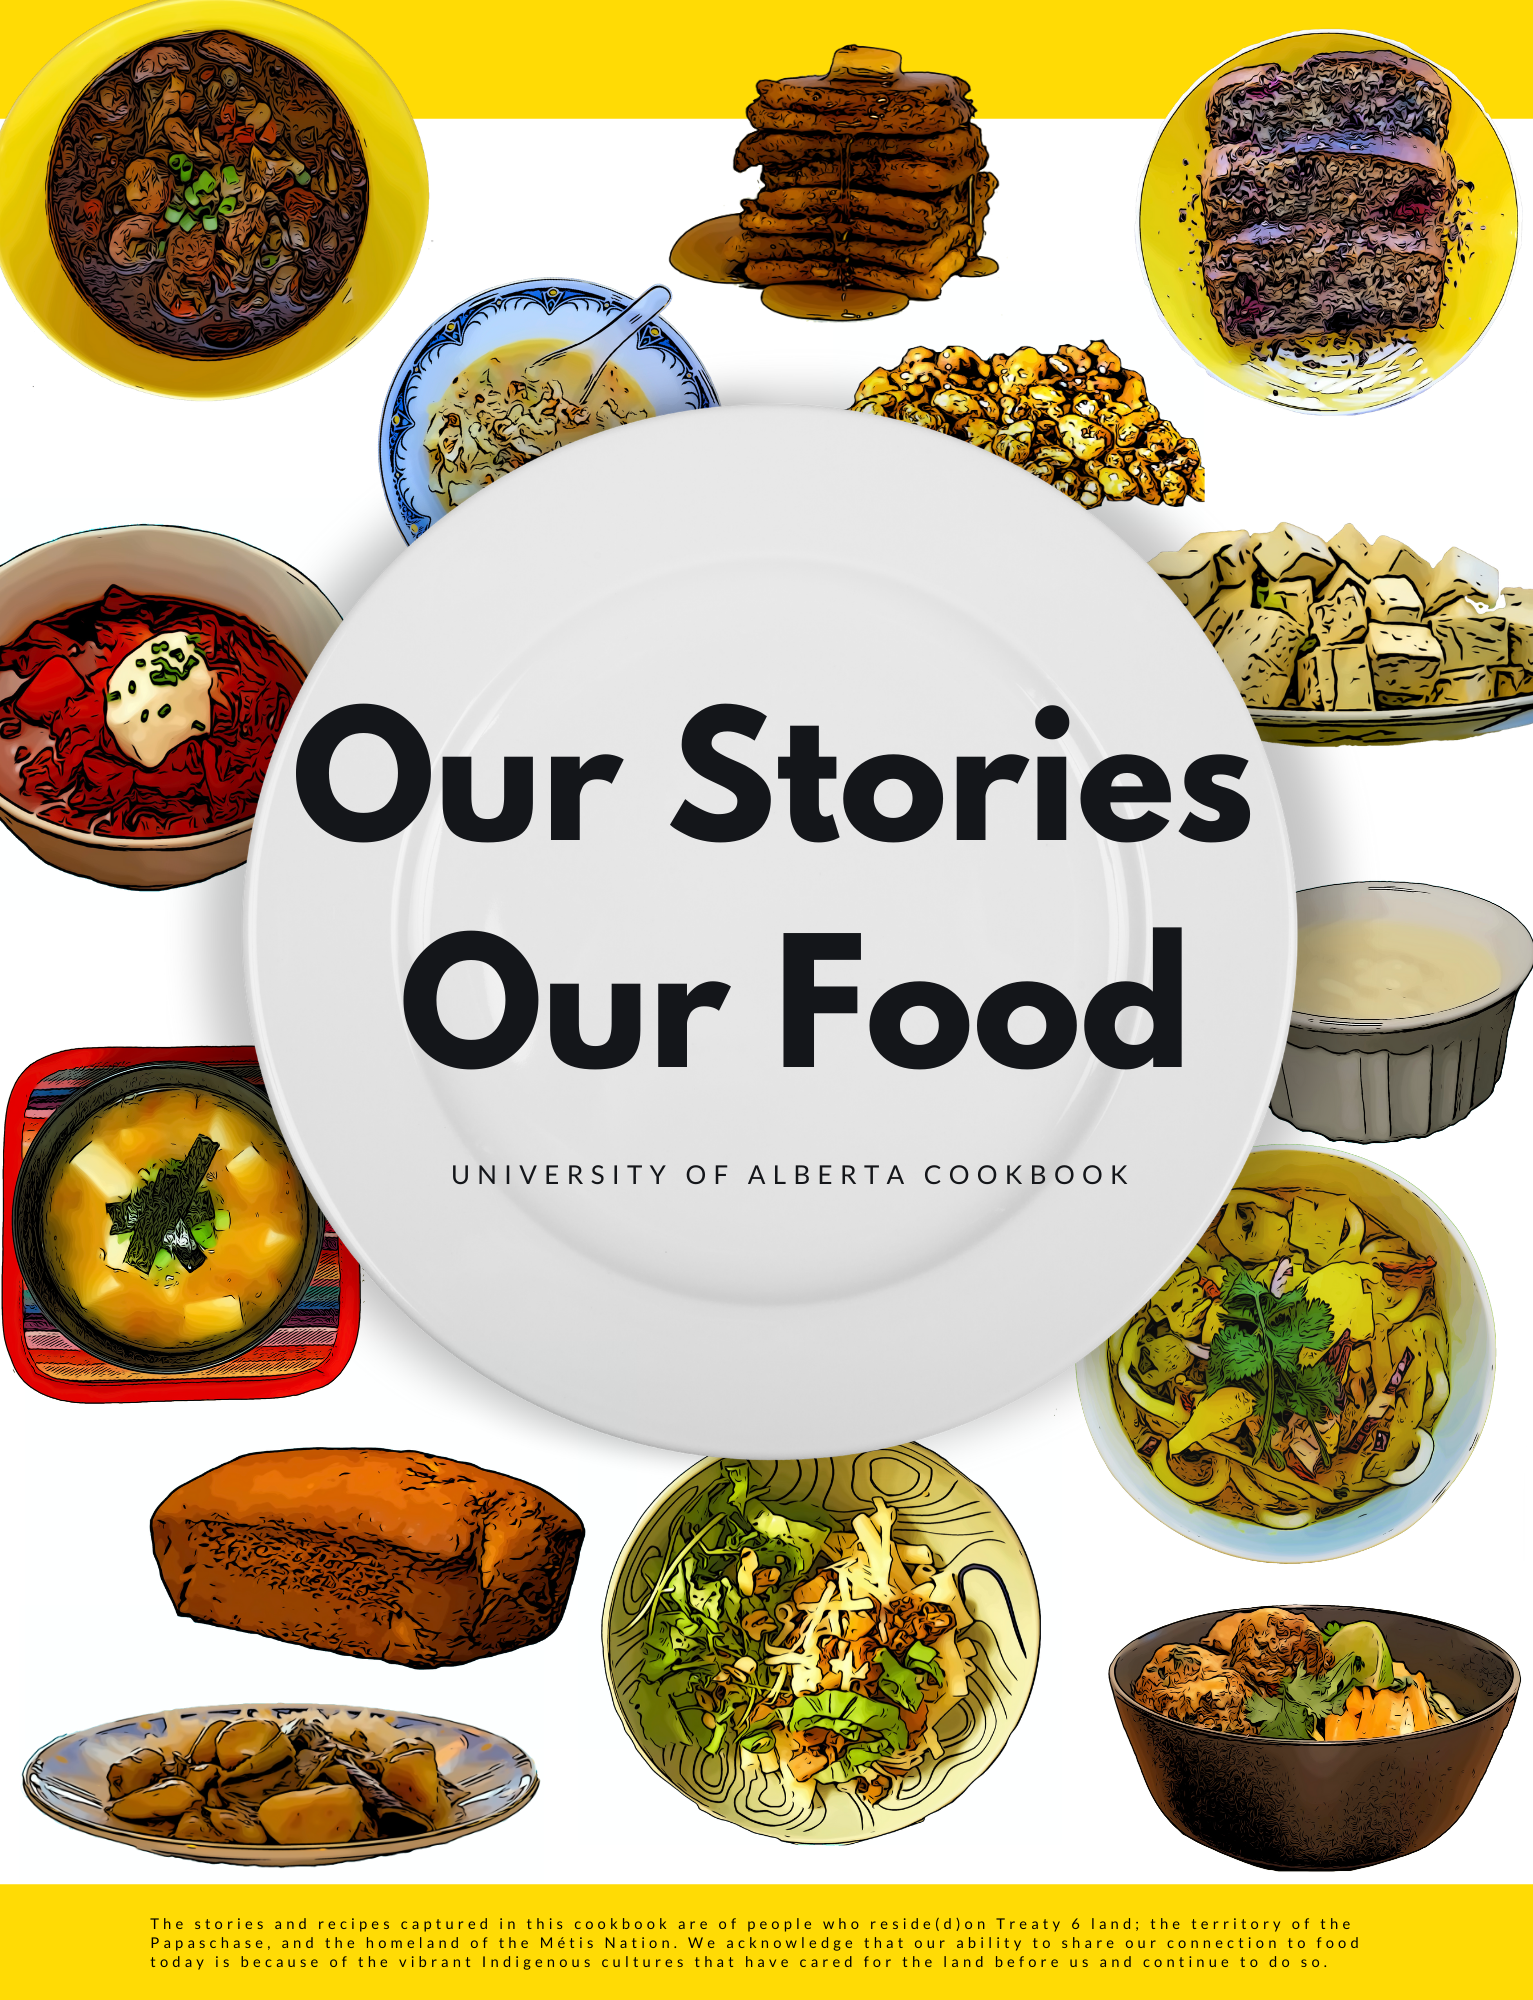 Our Stories, Our Food: The University of Alberta Cookbook